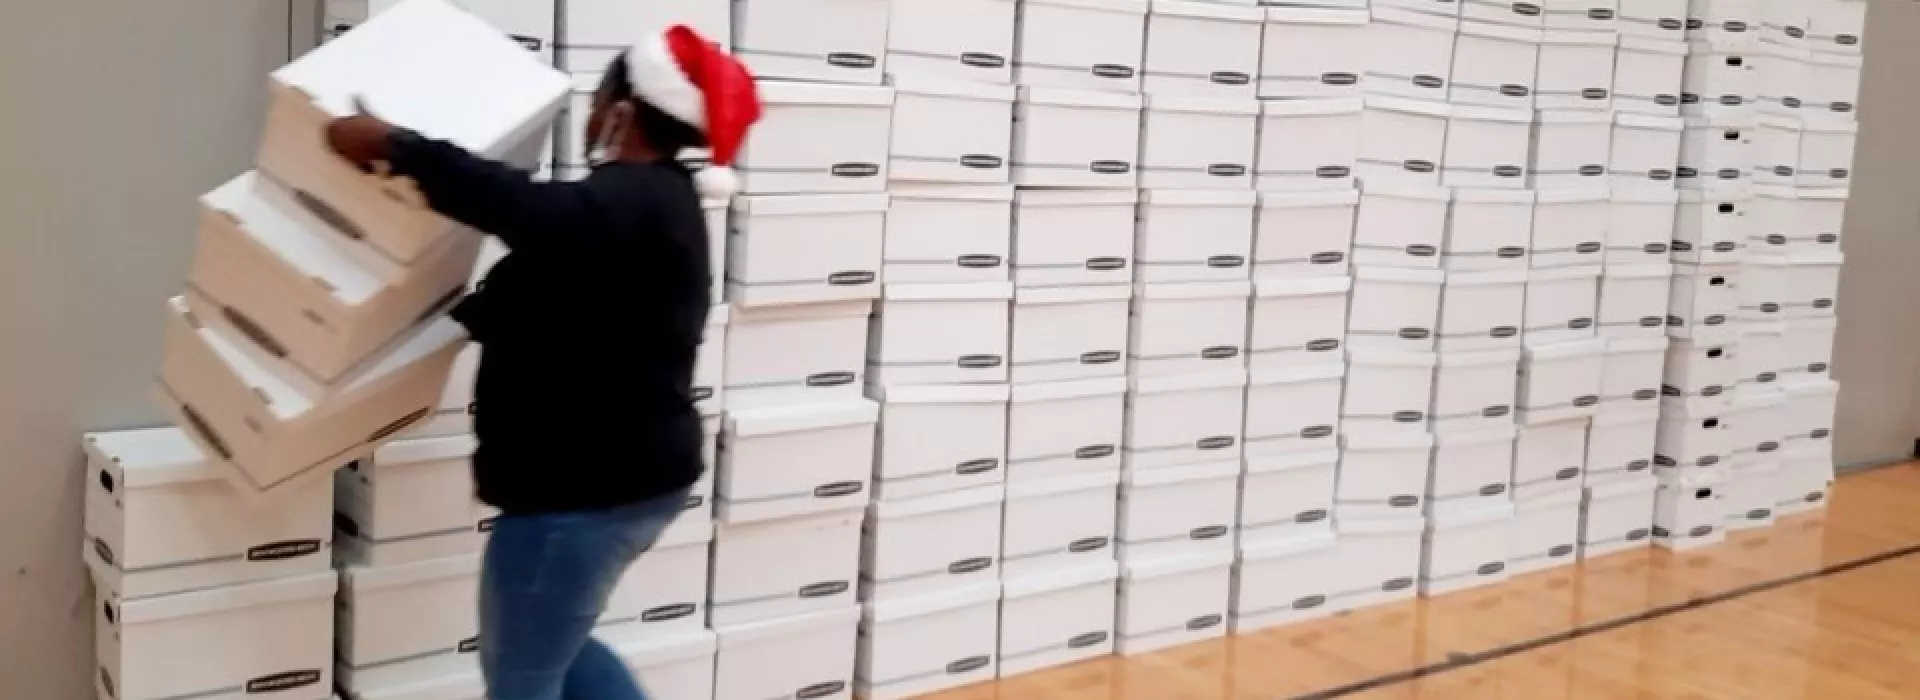 Catalyst Christmas Box Stacking